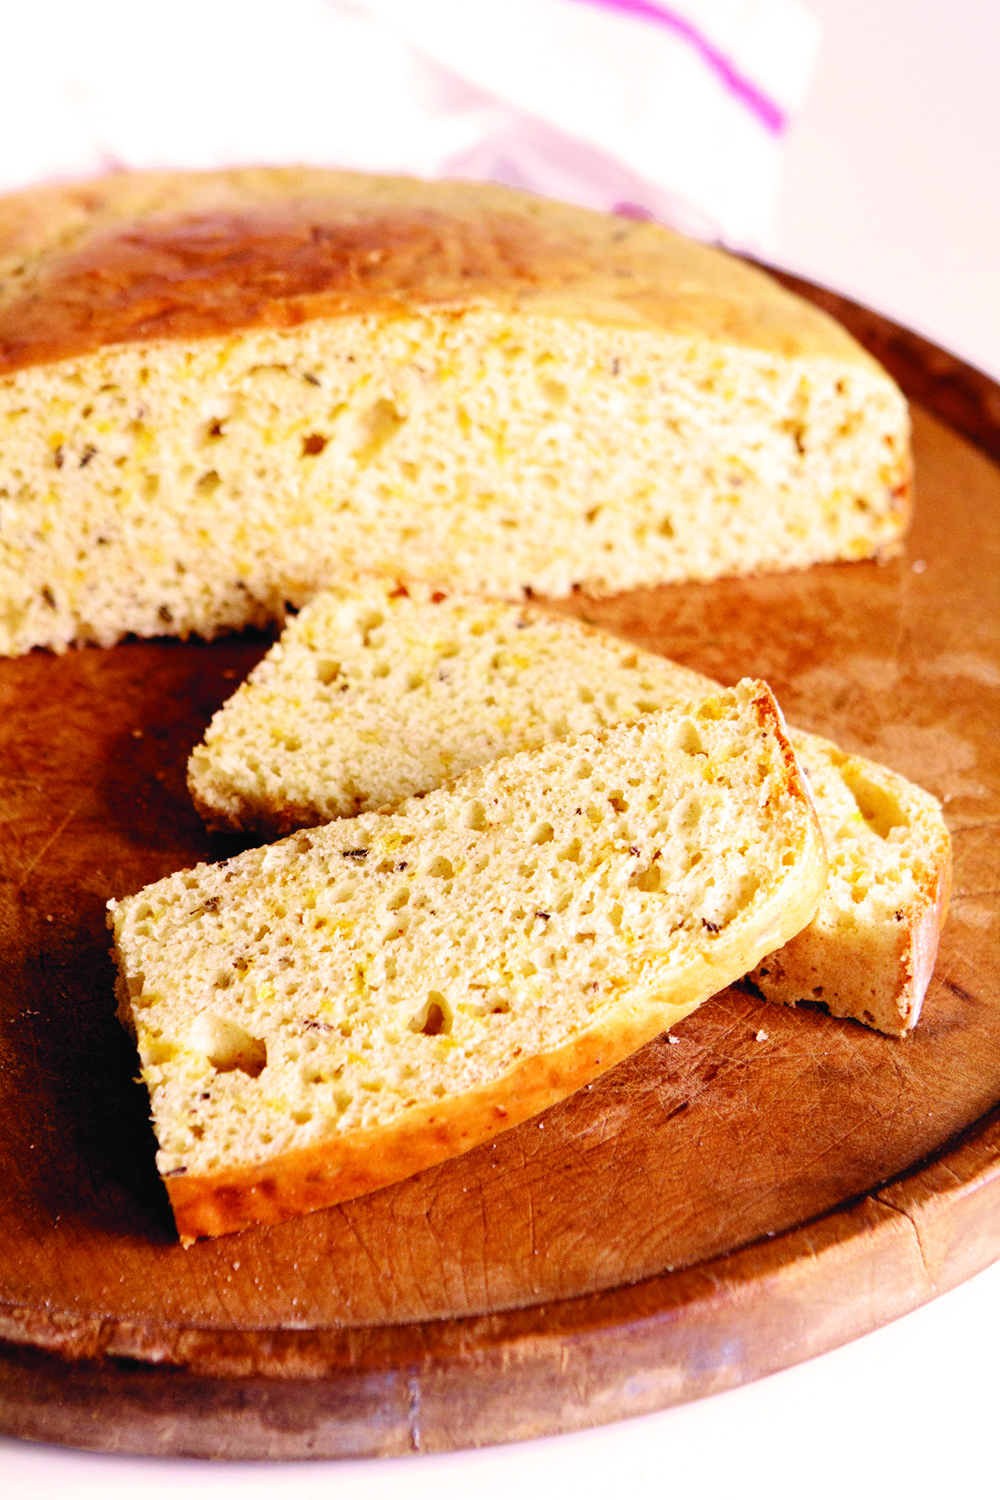 A cheesy variation of soda bread pairs well with meats and stews.